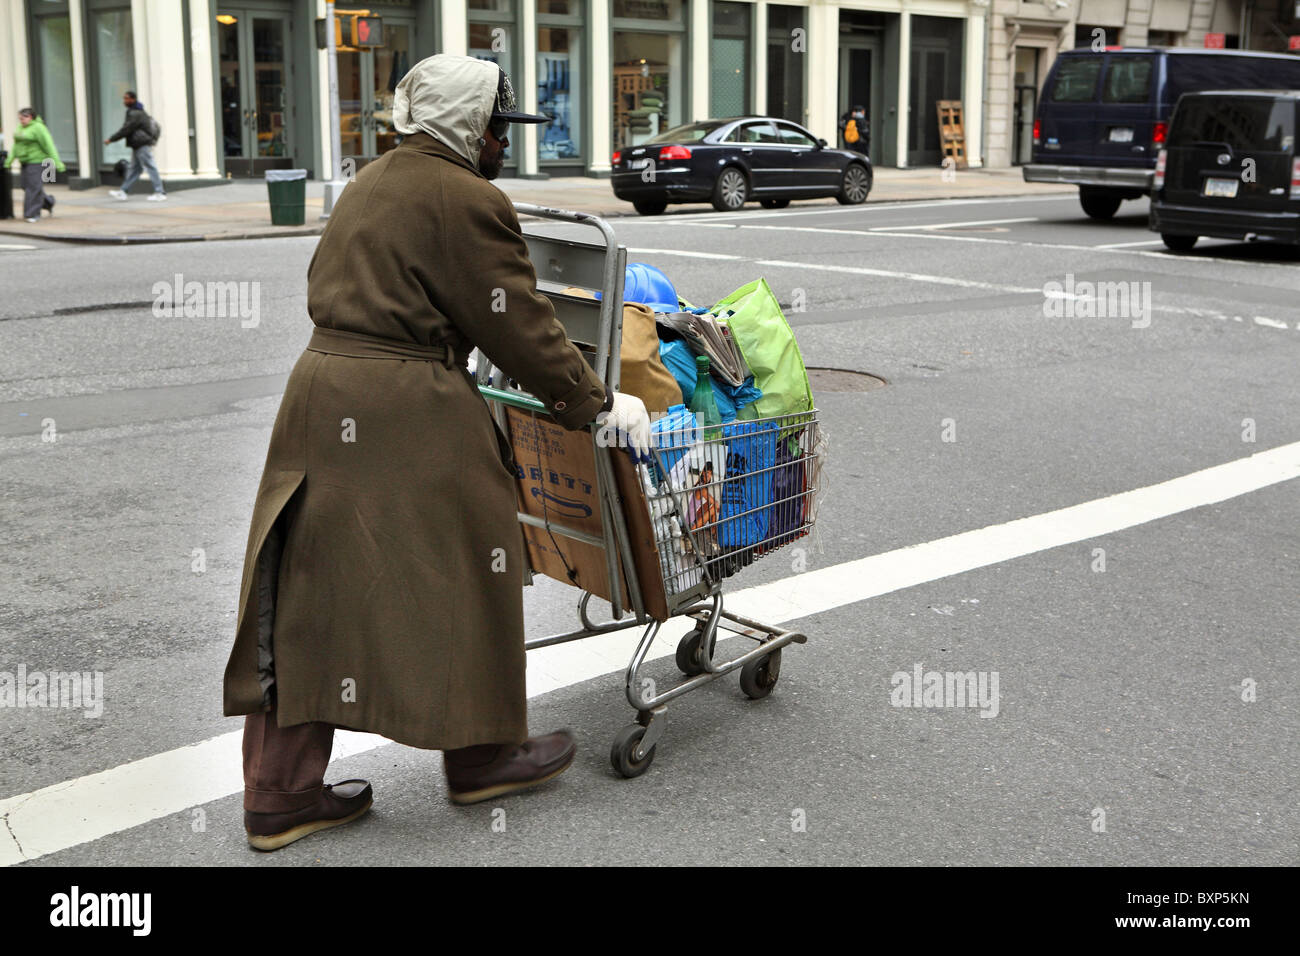 A homeless person in New York City, USA Stock Photo